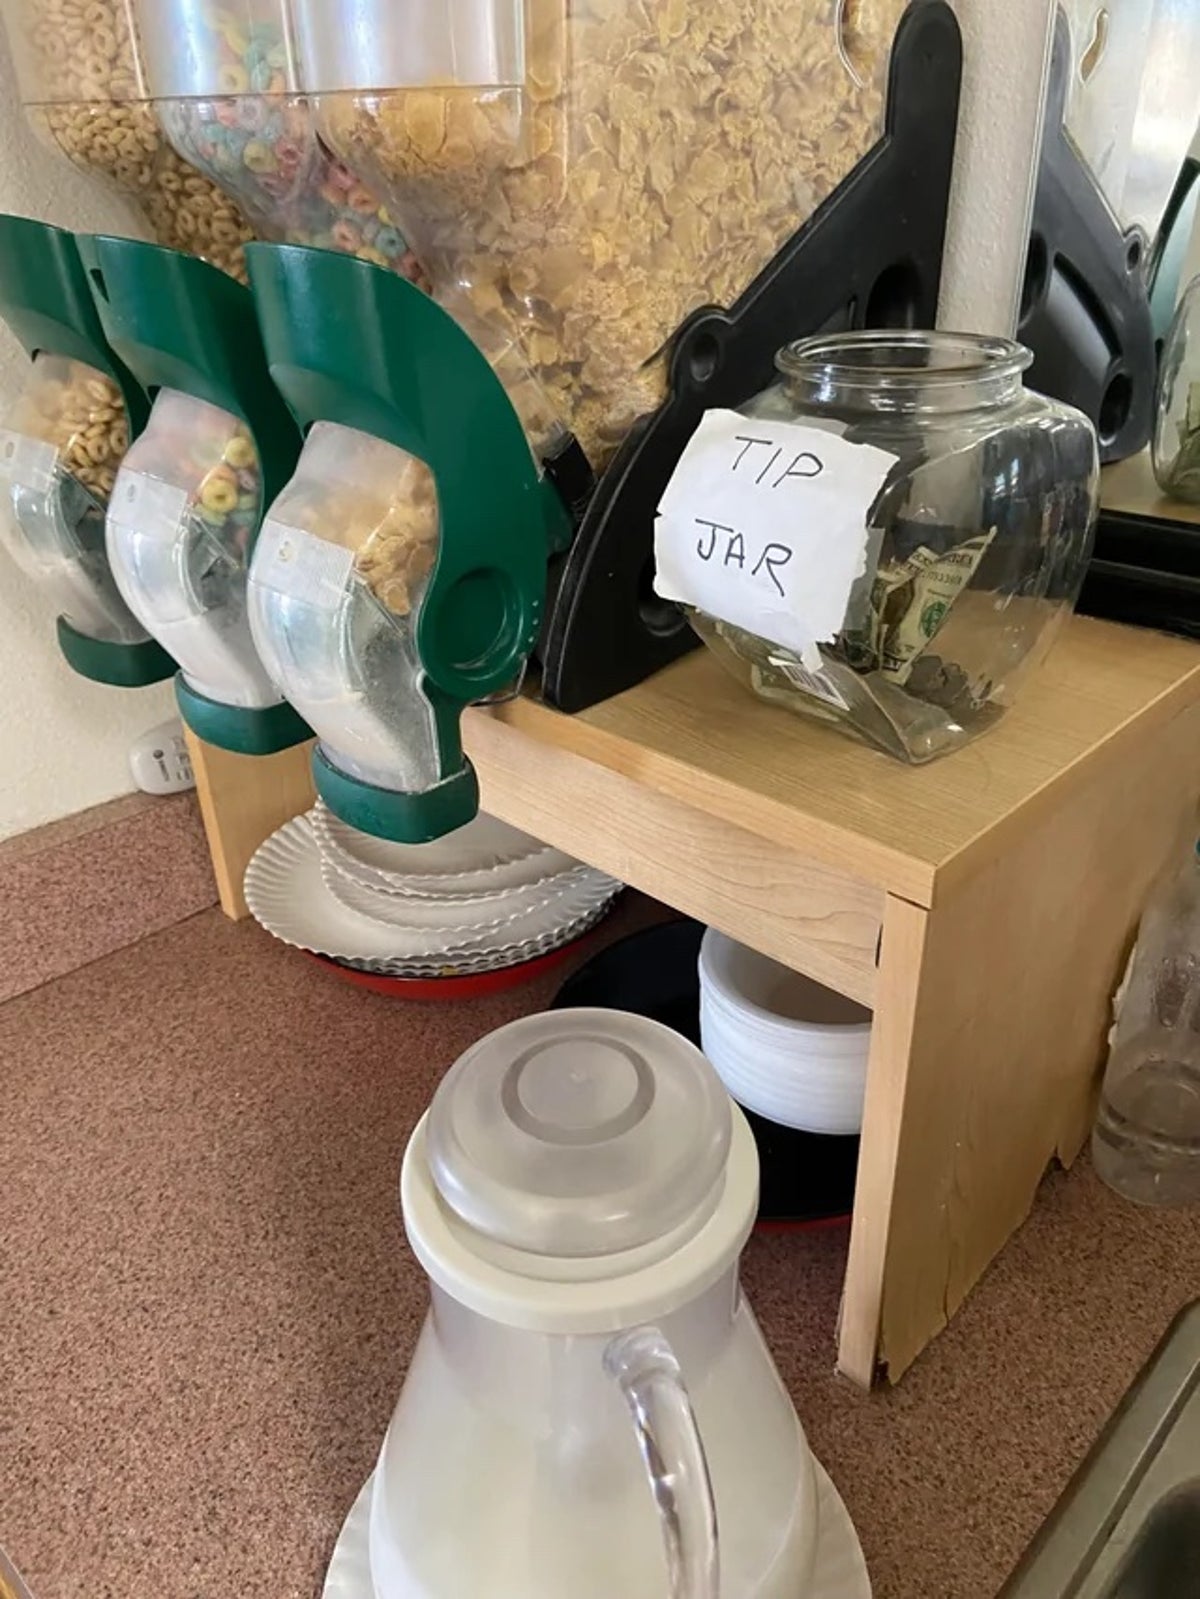 Tip jar at a hotel self-service breakfast buffet sparks backlash: ‘Fill the jar with cereal’